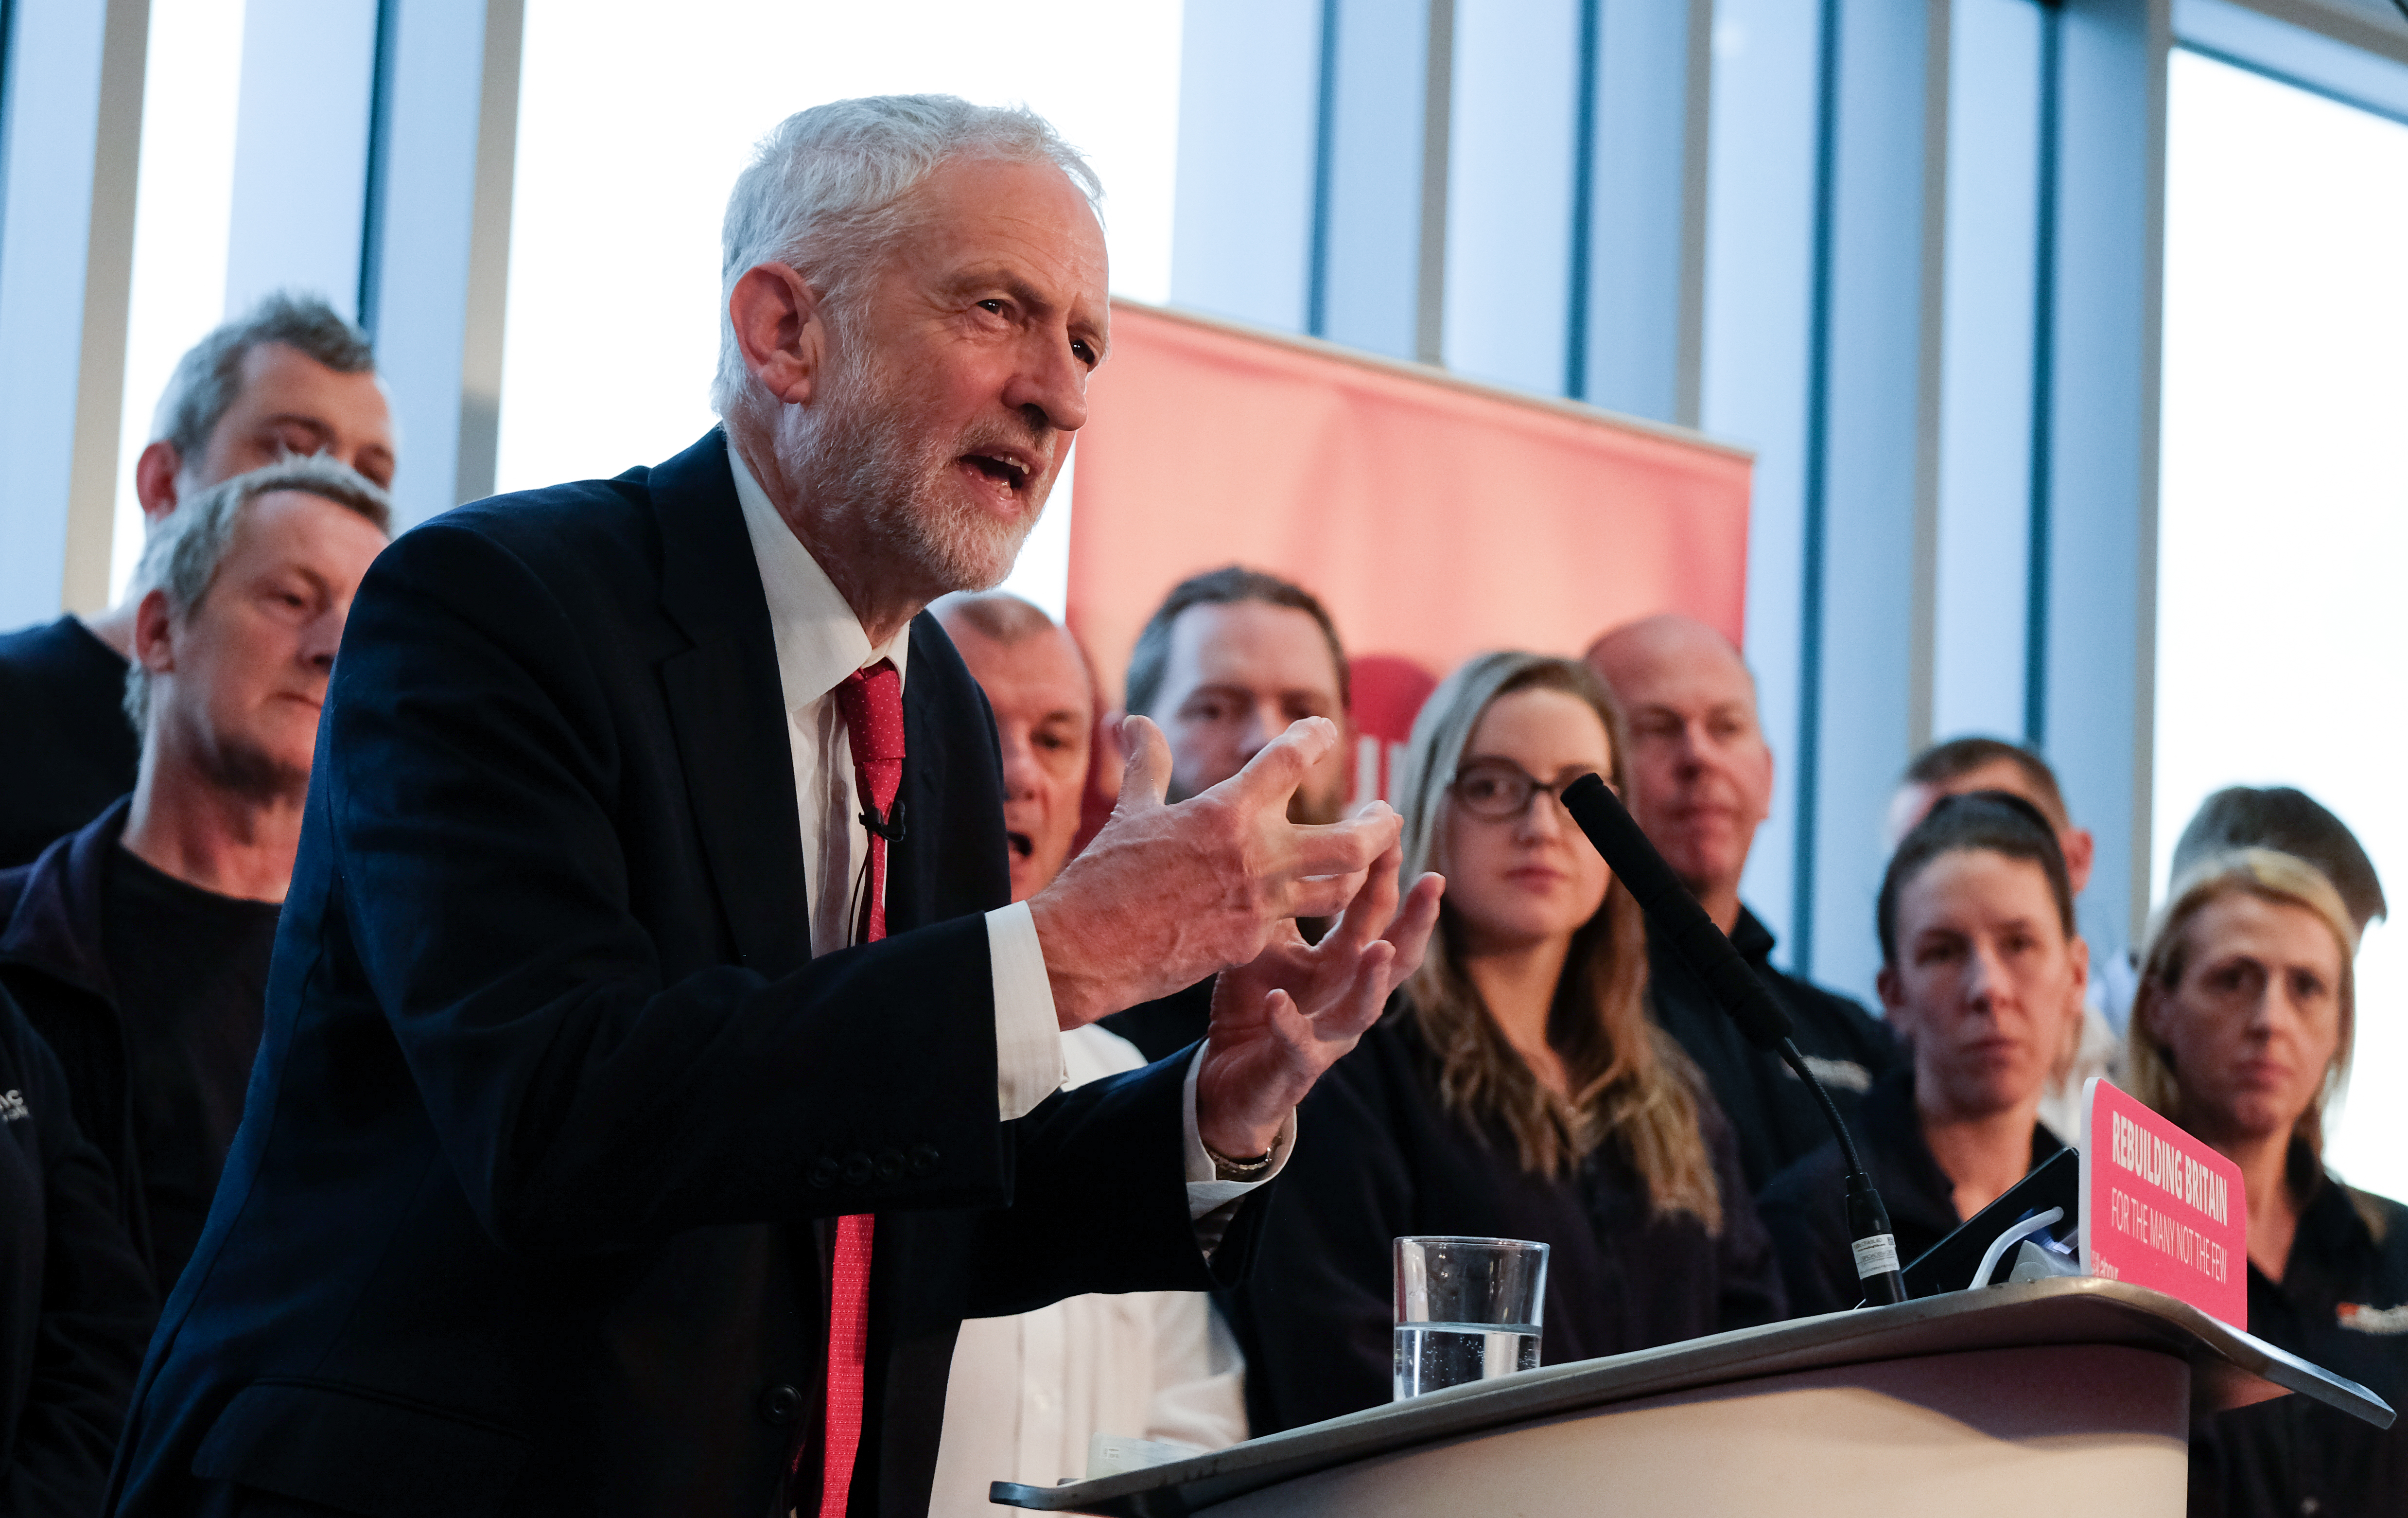 WAKEFIELD, ENGLAND - JANUARY 10: Labour leader Jeremy Corbyn delivers a speech to members of the media where he outlined Labour's approach to Brexit at the OE Electrics manufacturing factory on January 10, 2019 in Wakefield, England. The speech and q&amp;a session came ahead of the Meaningful Vote on Theresa May’s Brexit deal that is scheduled to take place next Tuesday. (Photo by Ian Forsyth/Getty Images)